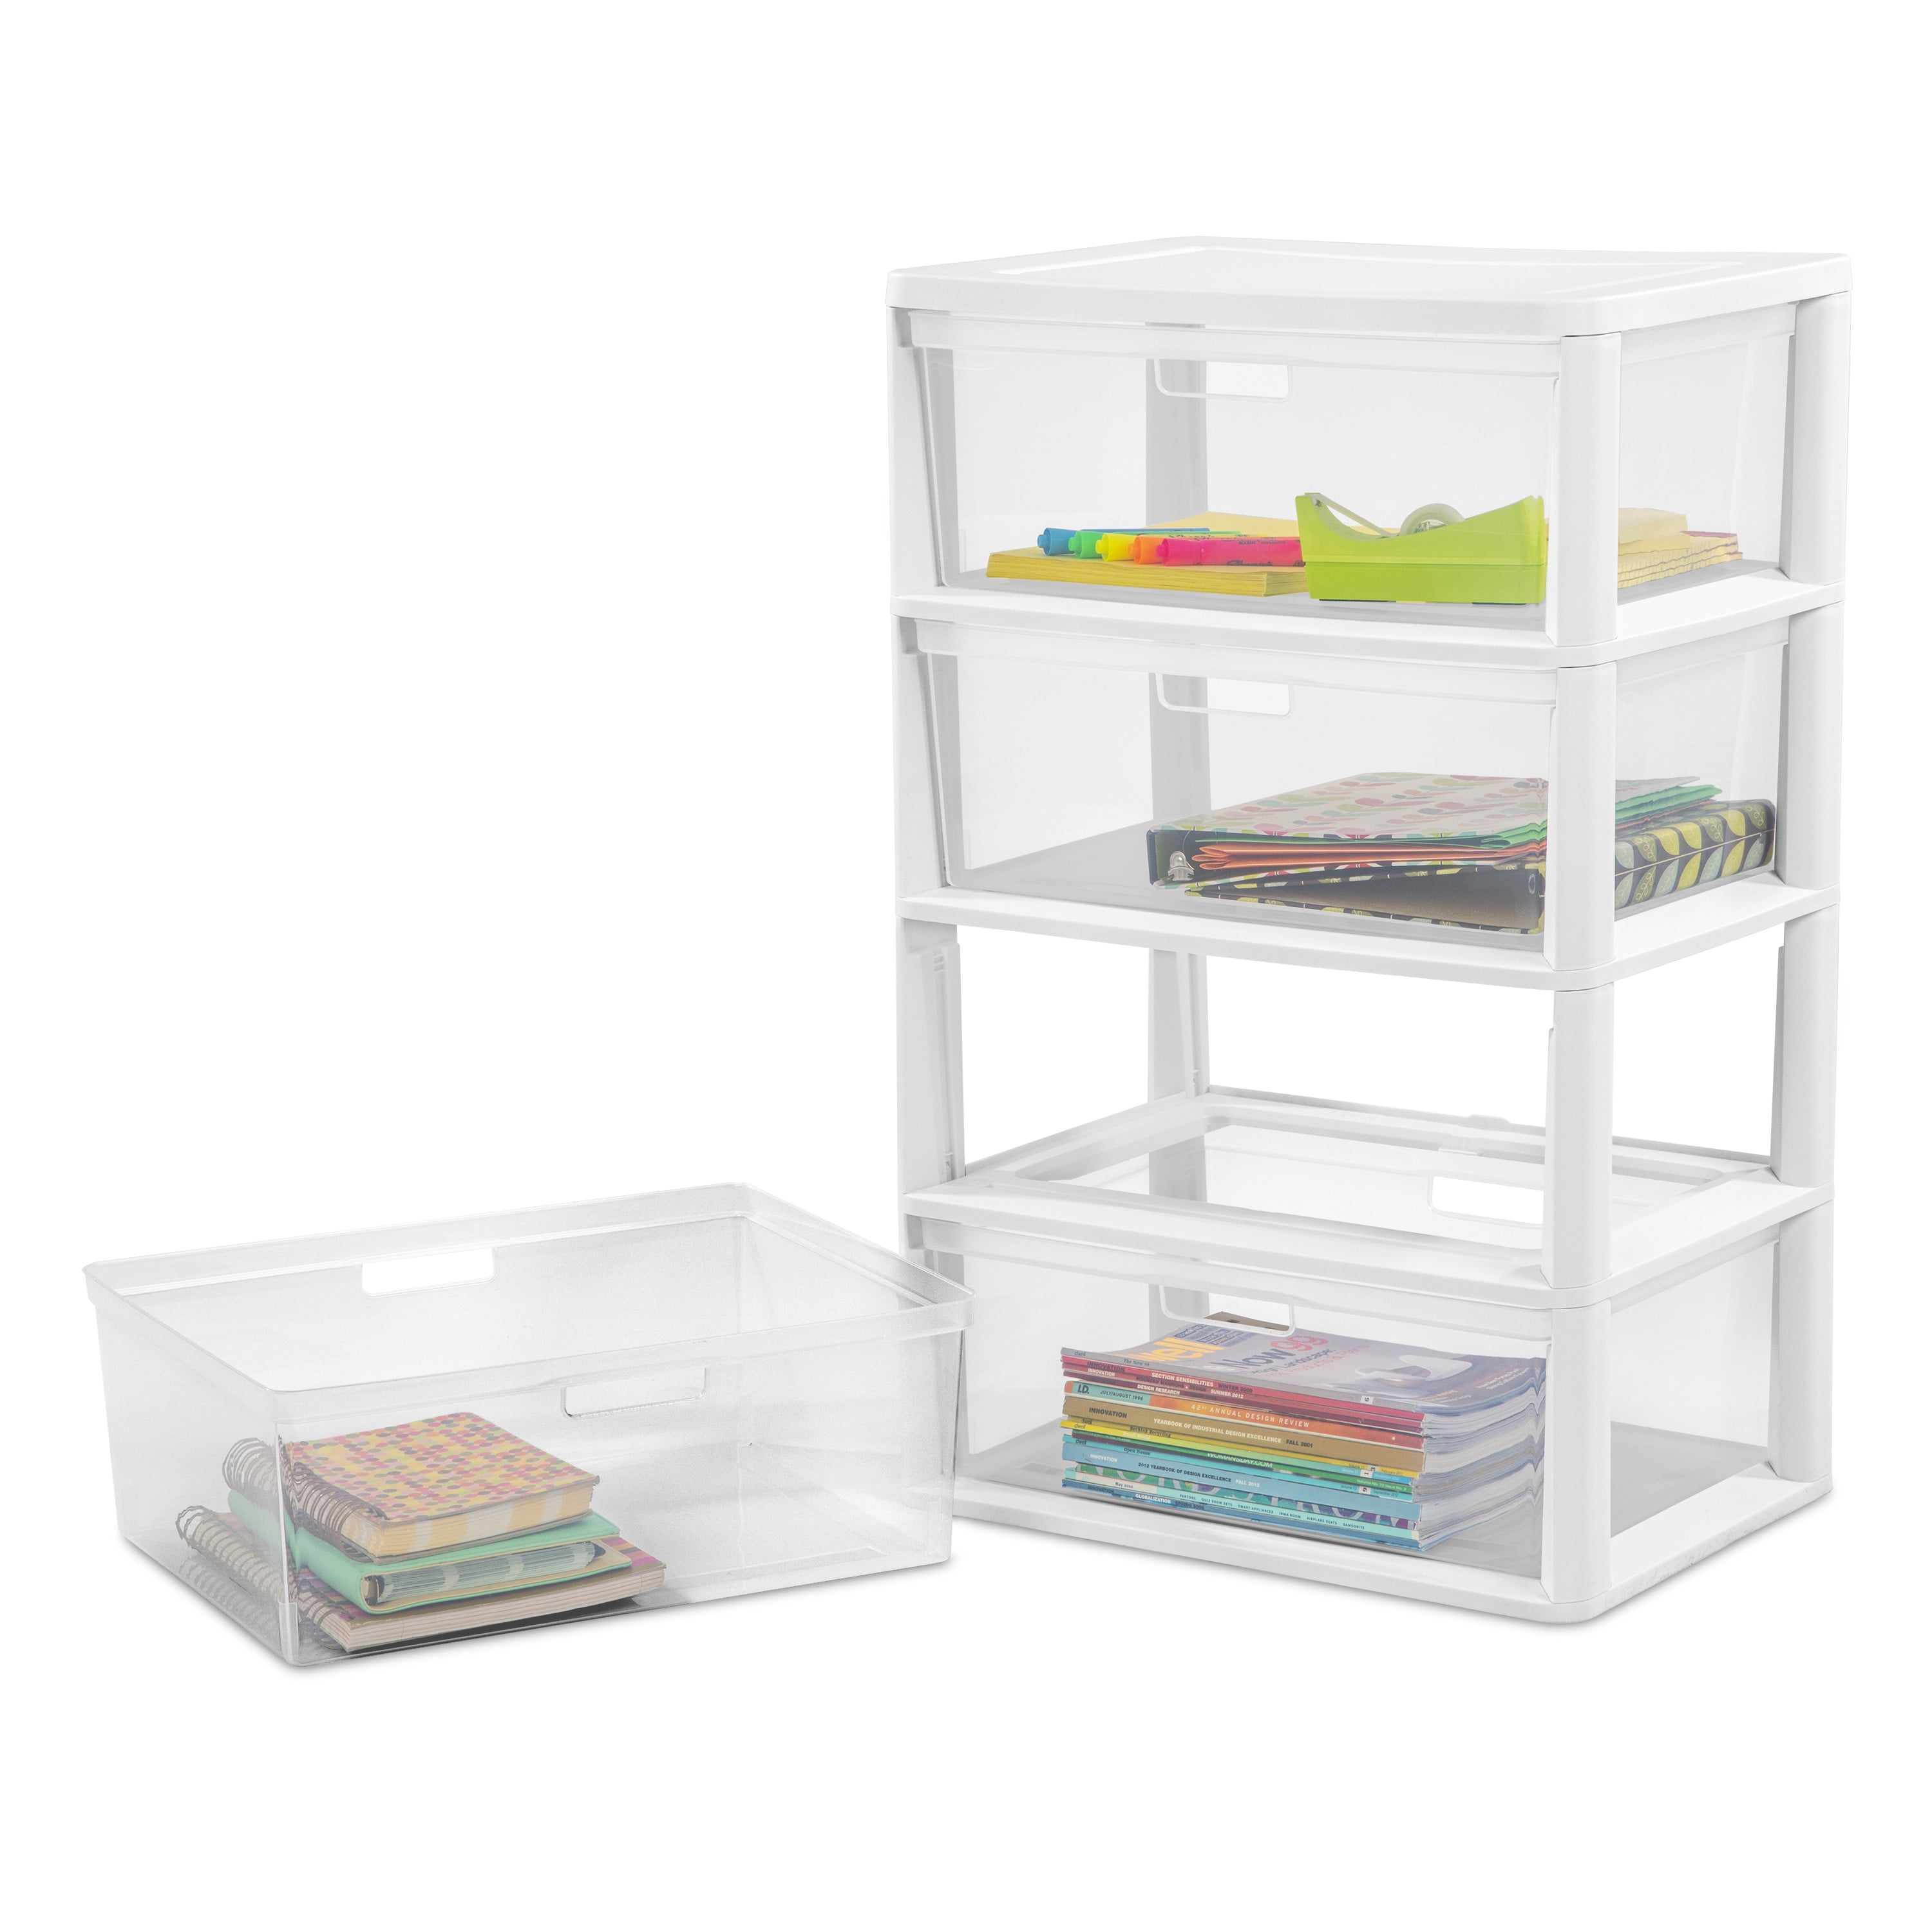 Sterilite storage drawers set of 4 - household items - by owner